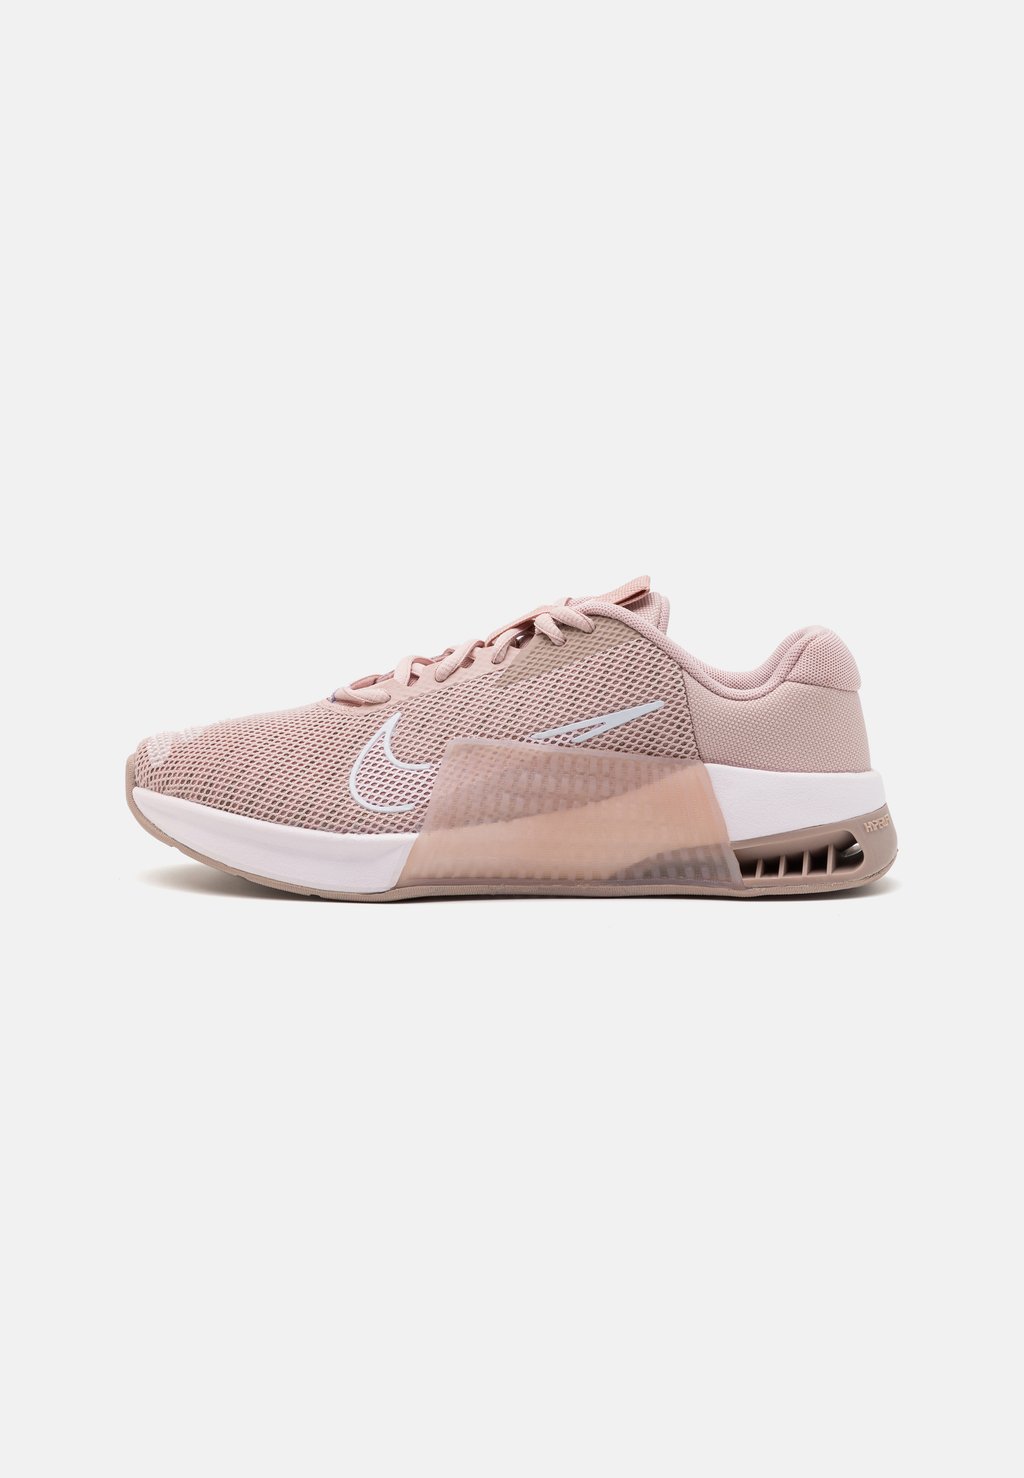 pink pearl Кроссовки METCON 9 Nike, цвет pink oxford/white/diffused taupe/pearl pink